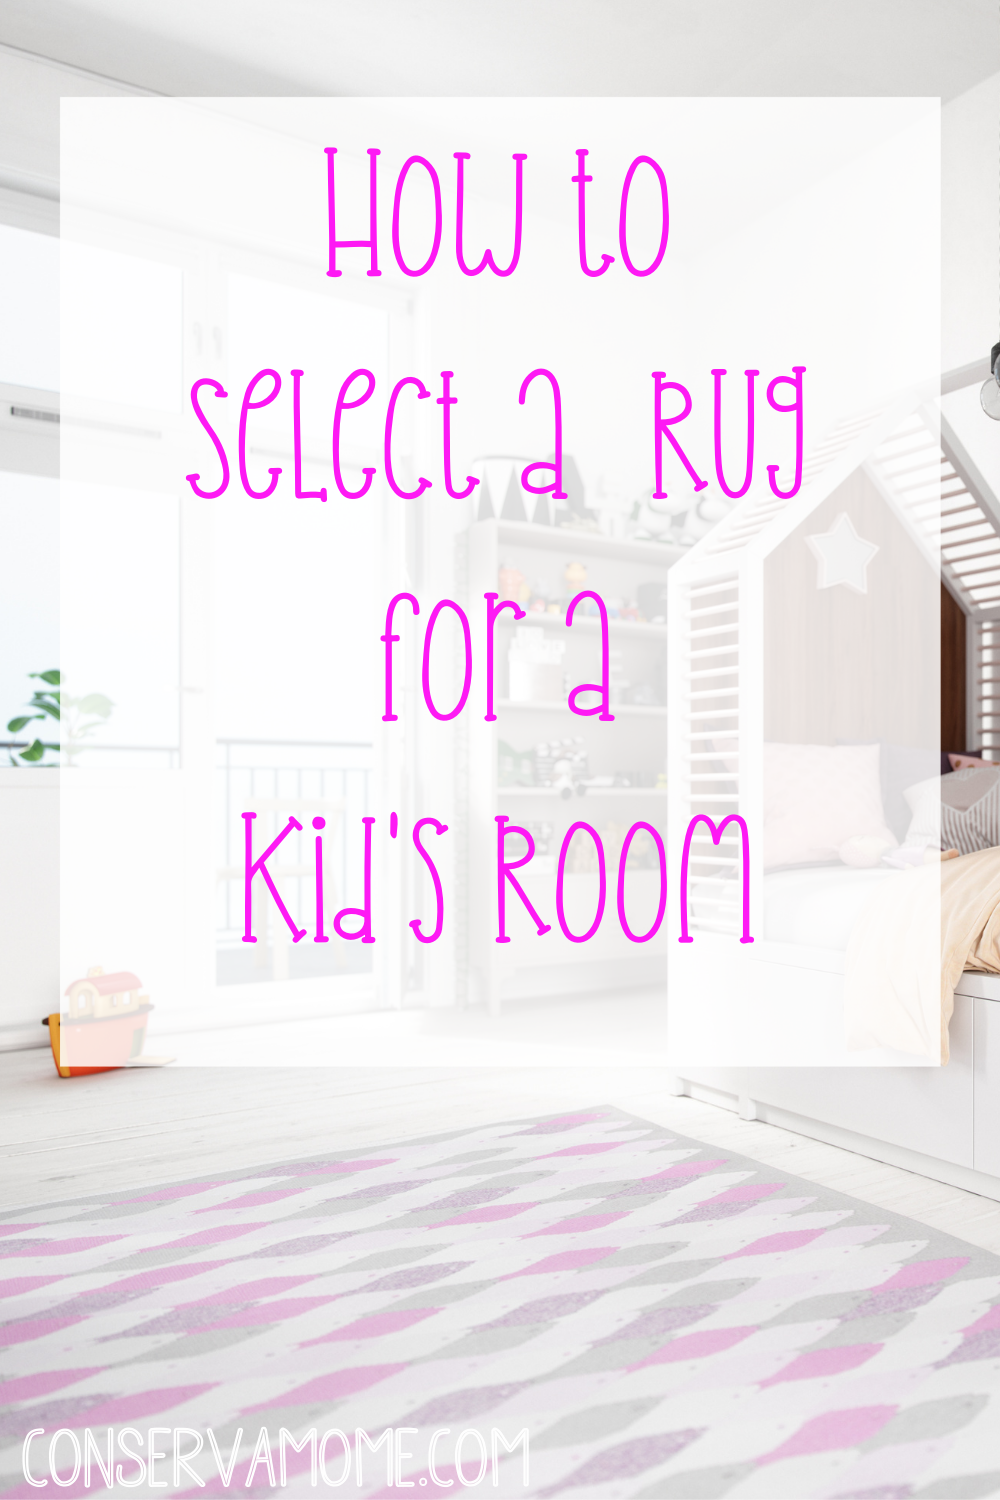 How to Select a Rug for a Kid's room